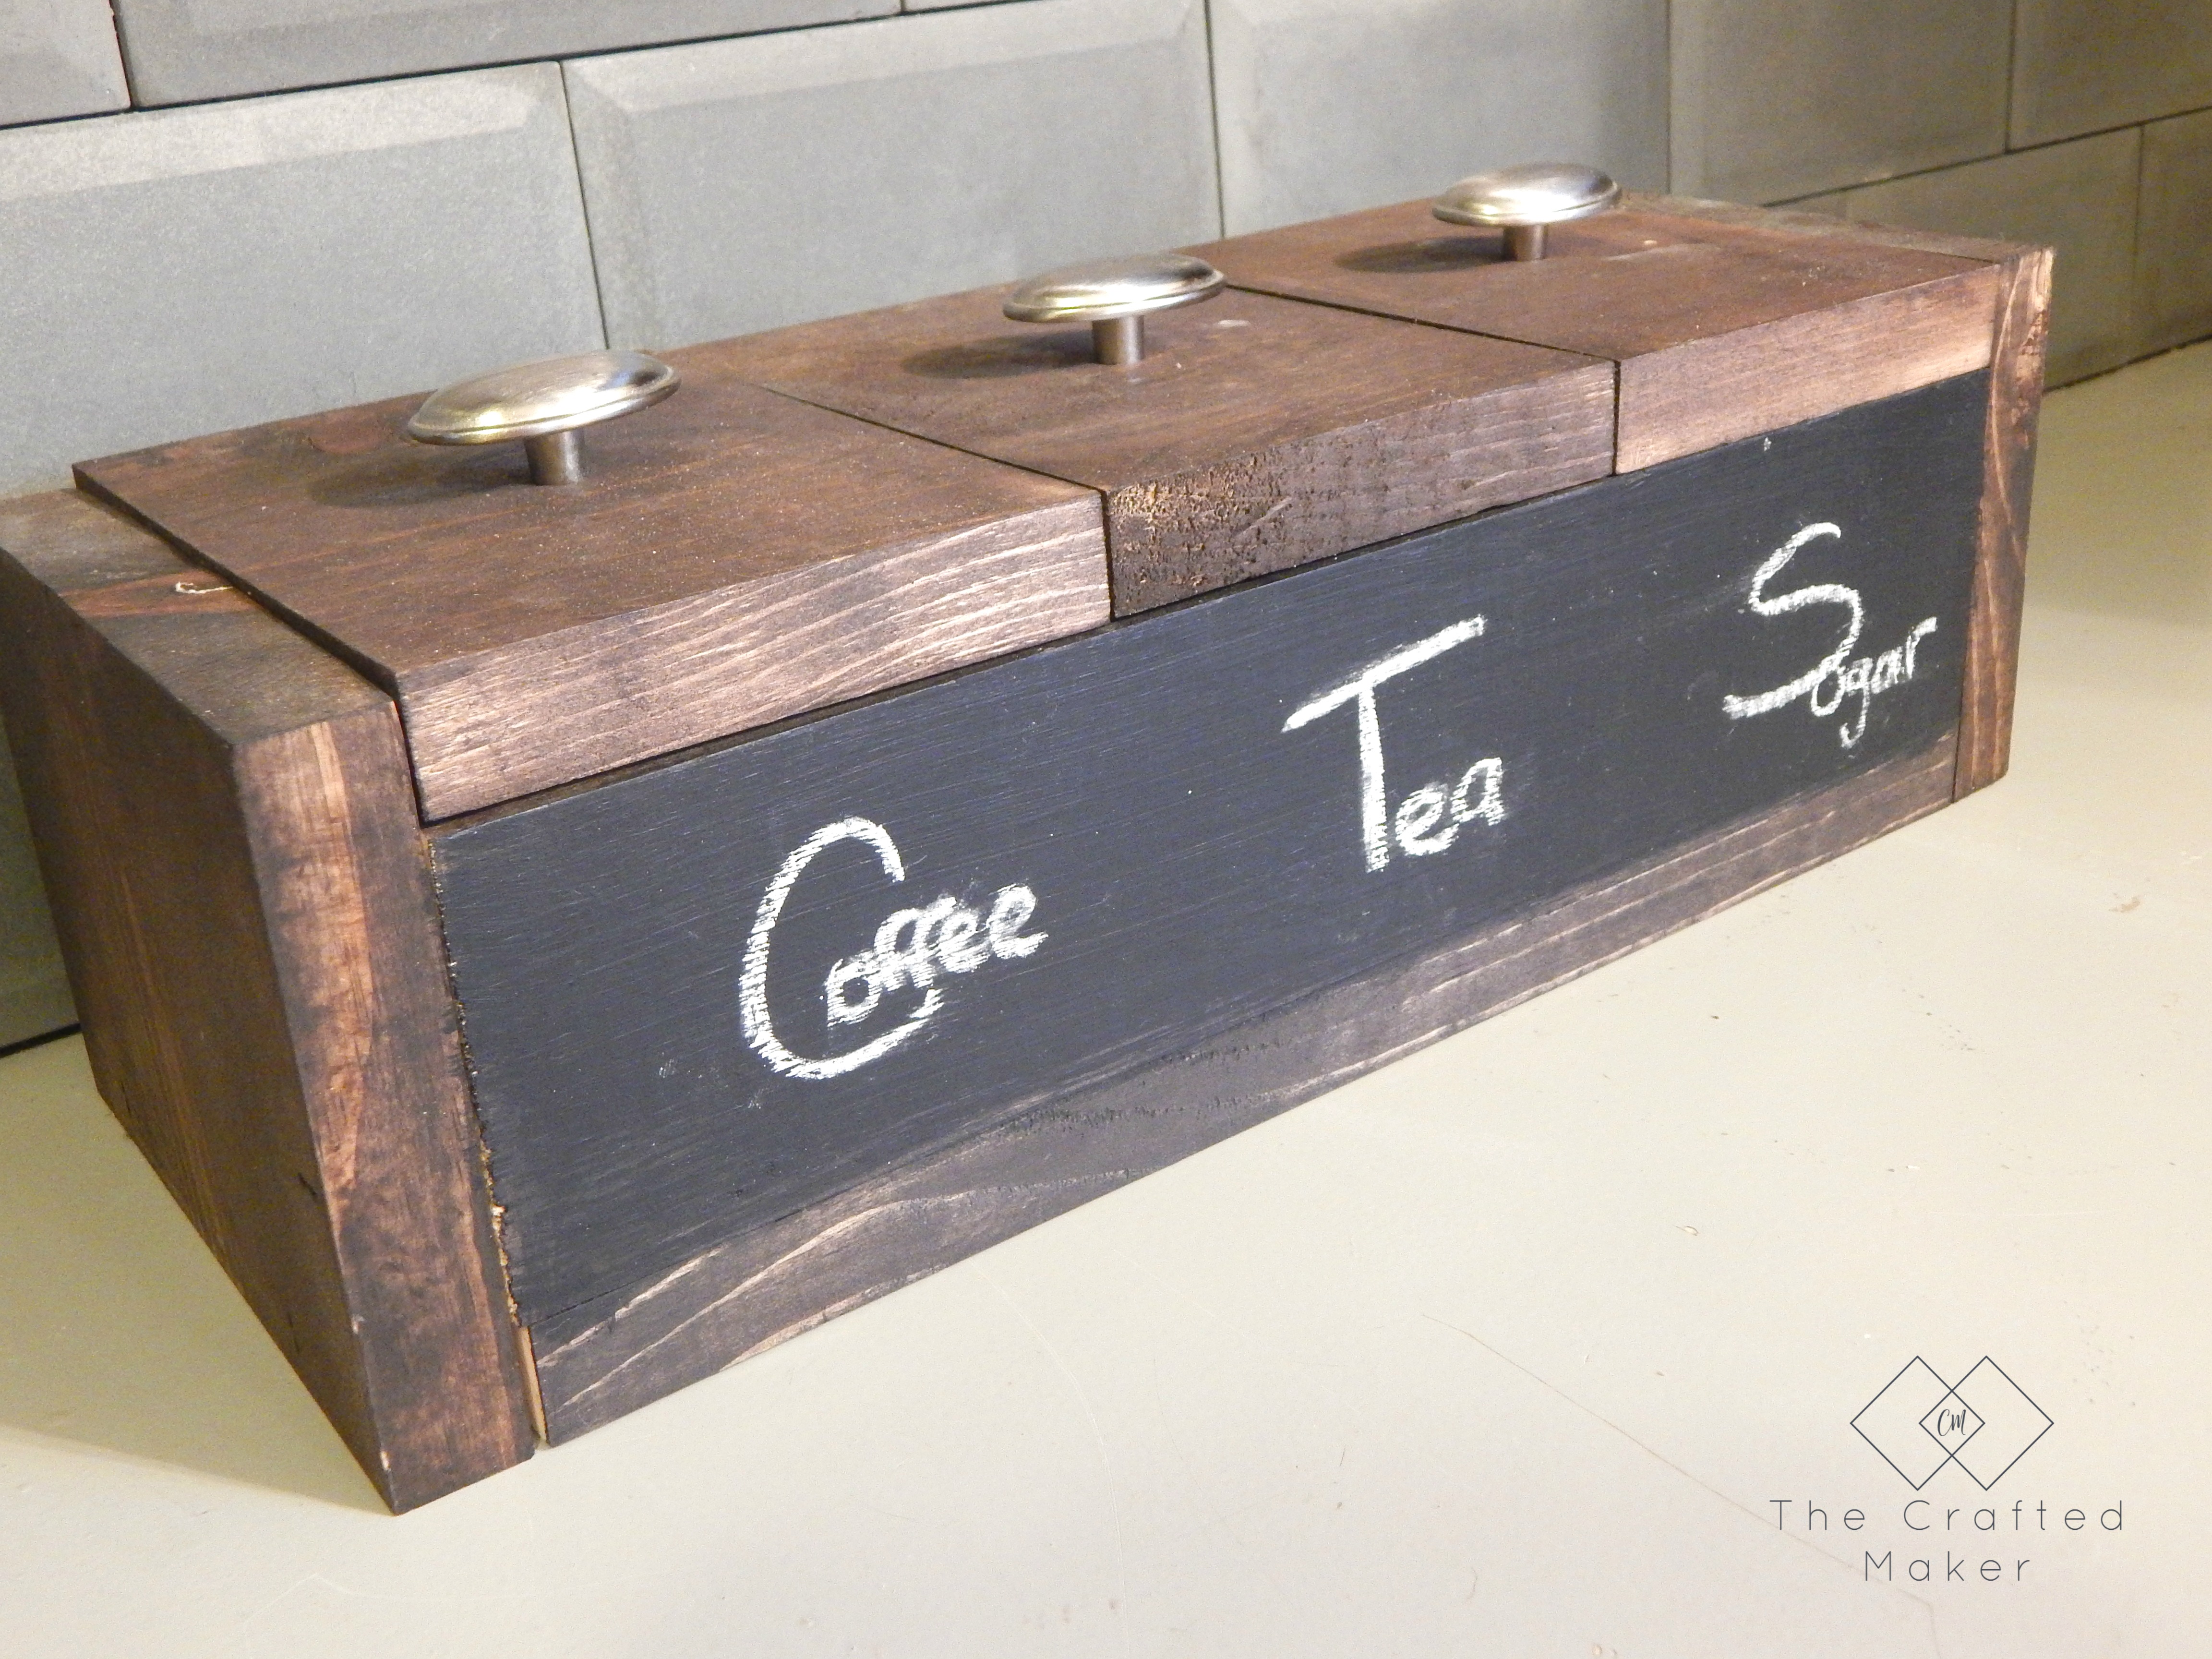 Store all of your favorite kitchen beverages in this handy and simple to make beverage box. Free plans included. Make your own today!